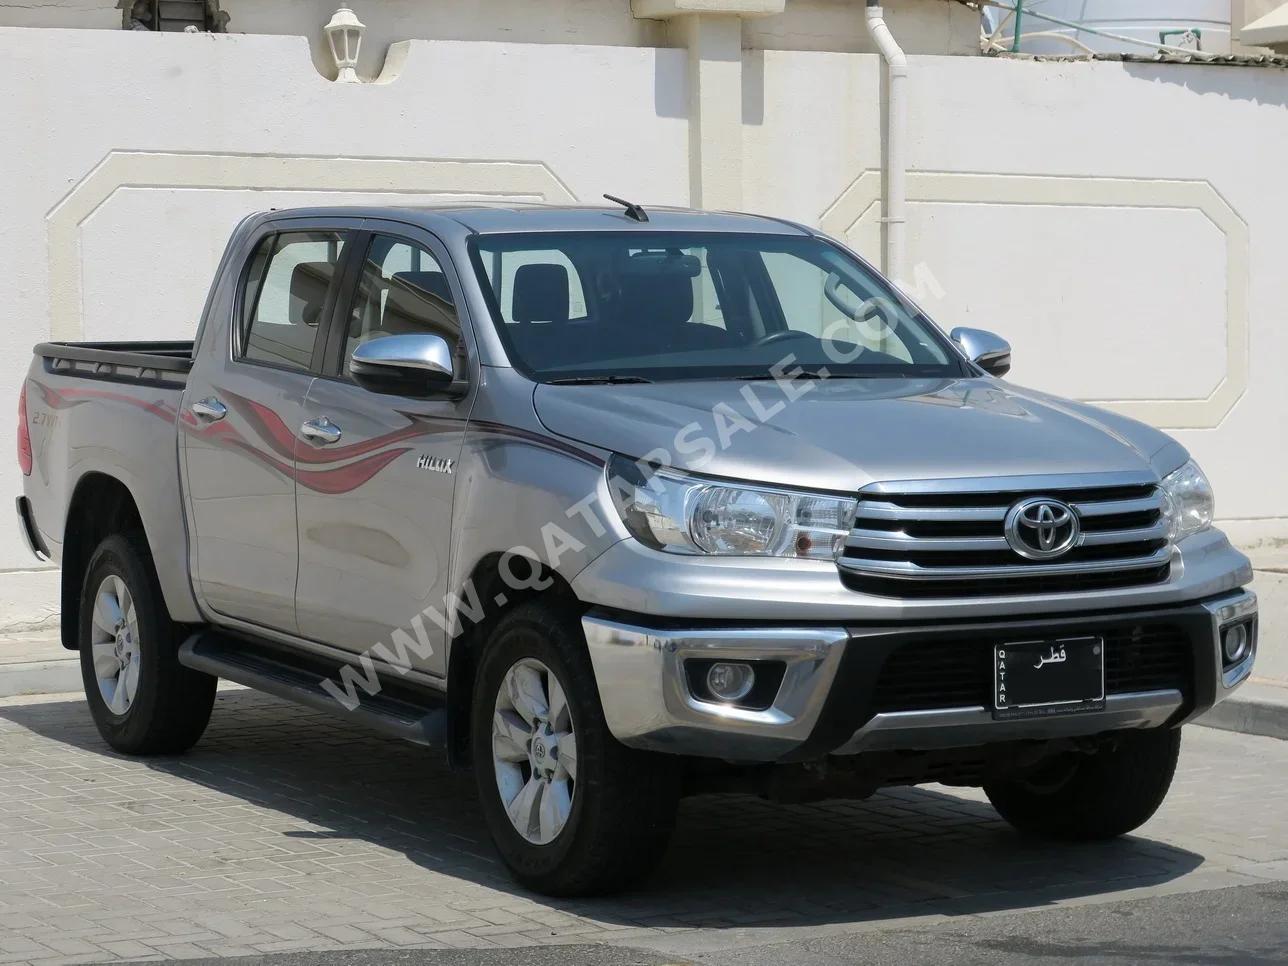 Toyota  Hilux  2020  Automatic  113,000 Km  4 Cylinder  Four Wheel Drive (4WD)  Pick Up  Silver